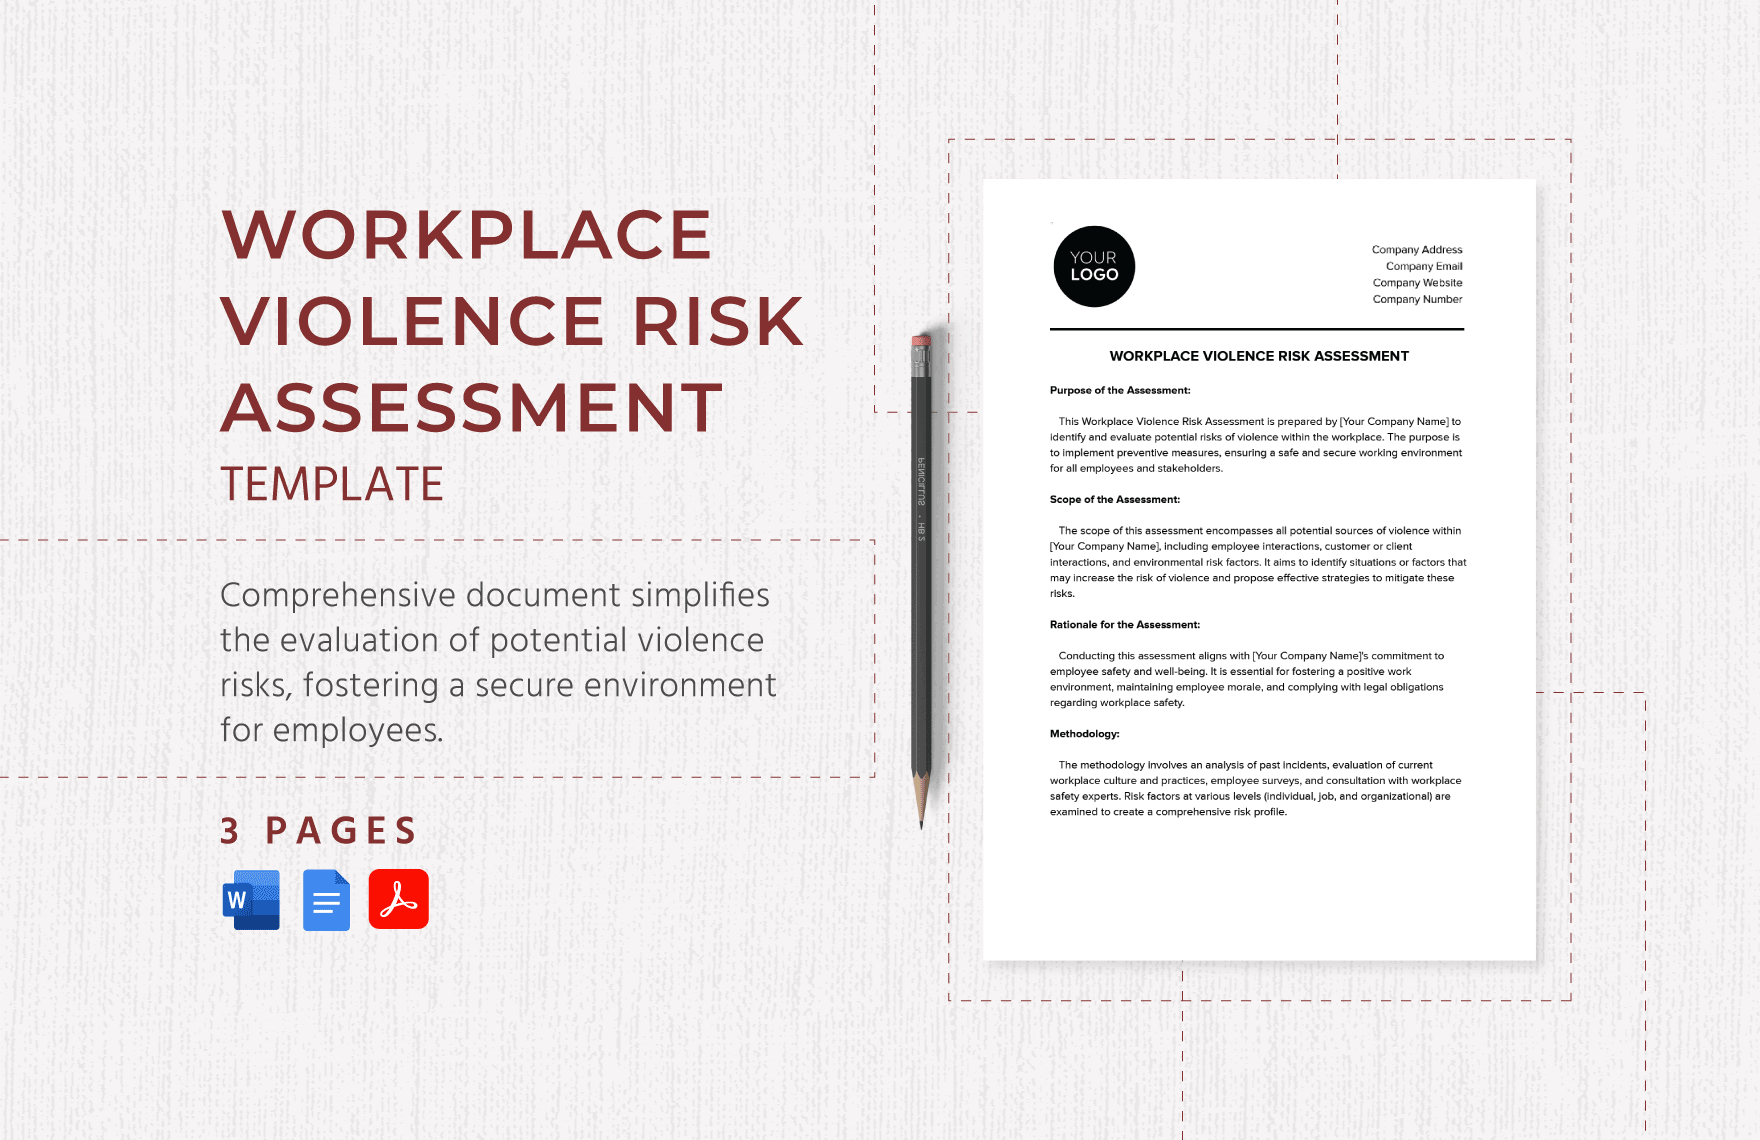 Workplace Violence Risk Assessment Template in Word, Google Docs, PDF